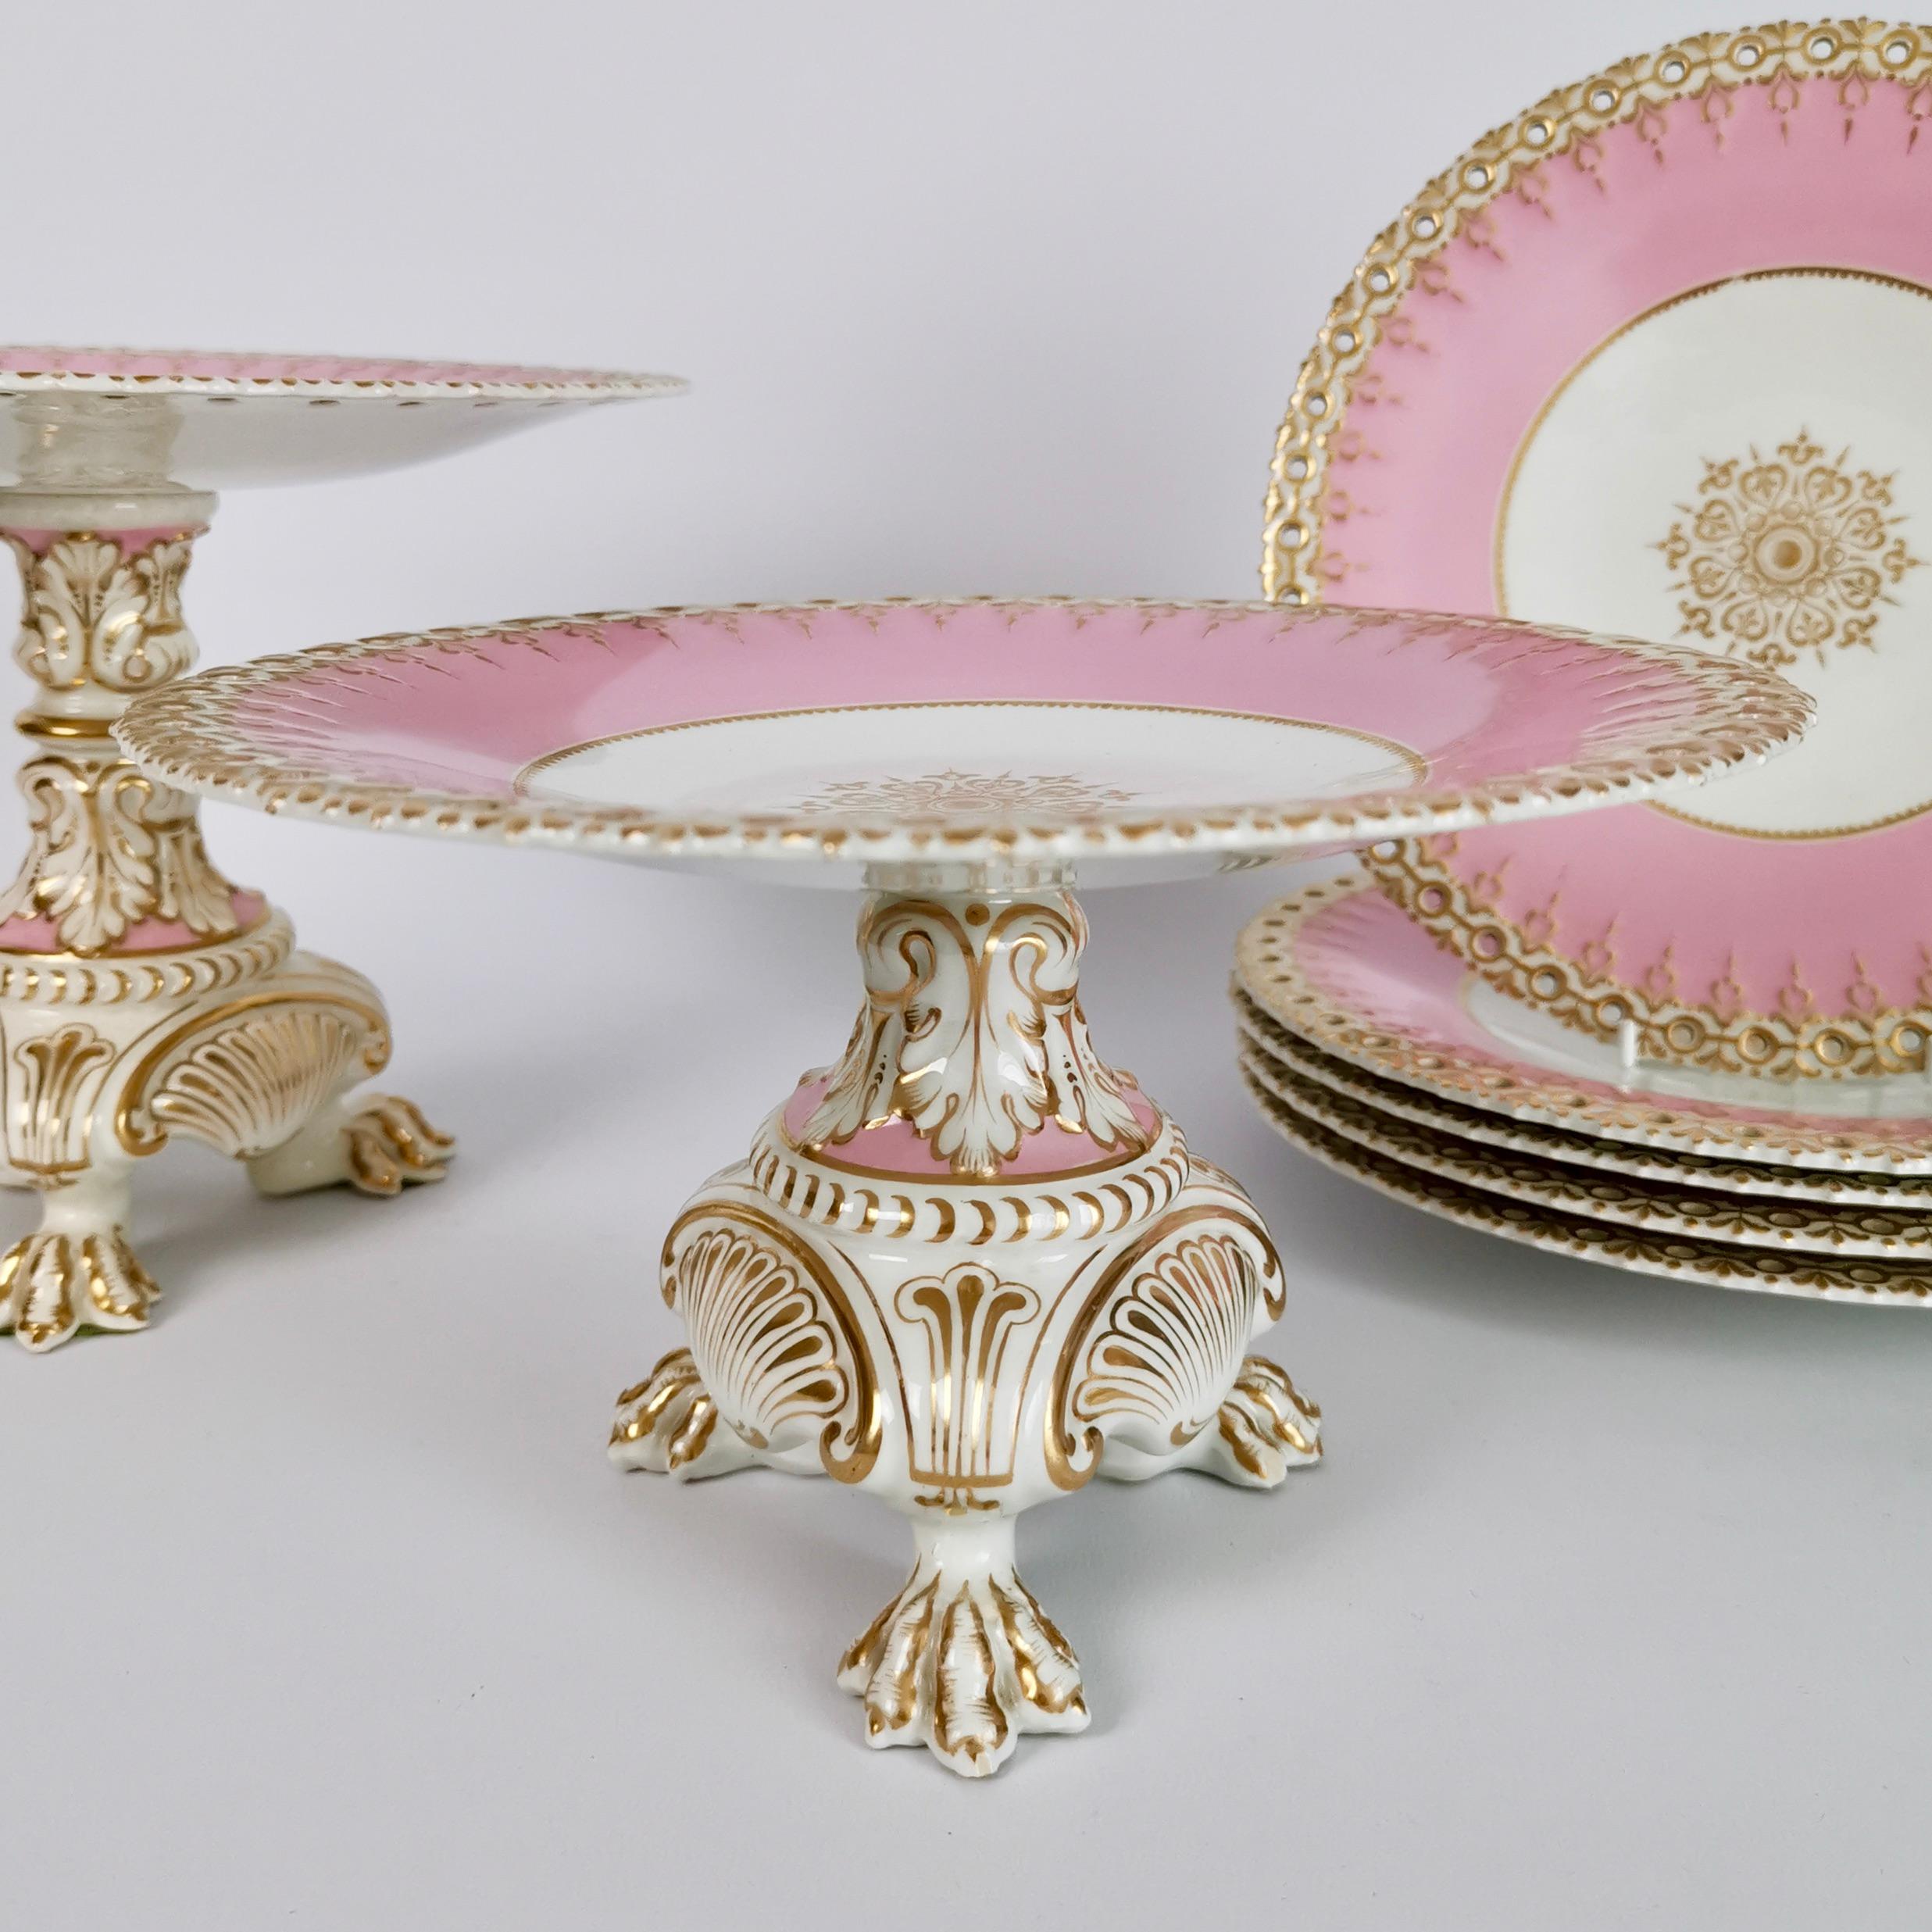 English Pink Porcelain Dessert Service, Spectacular Claw-Footed Tazzas, Victorian